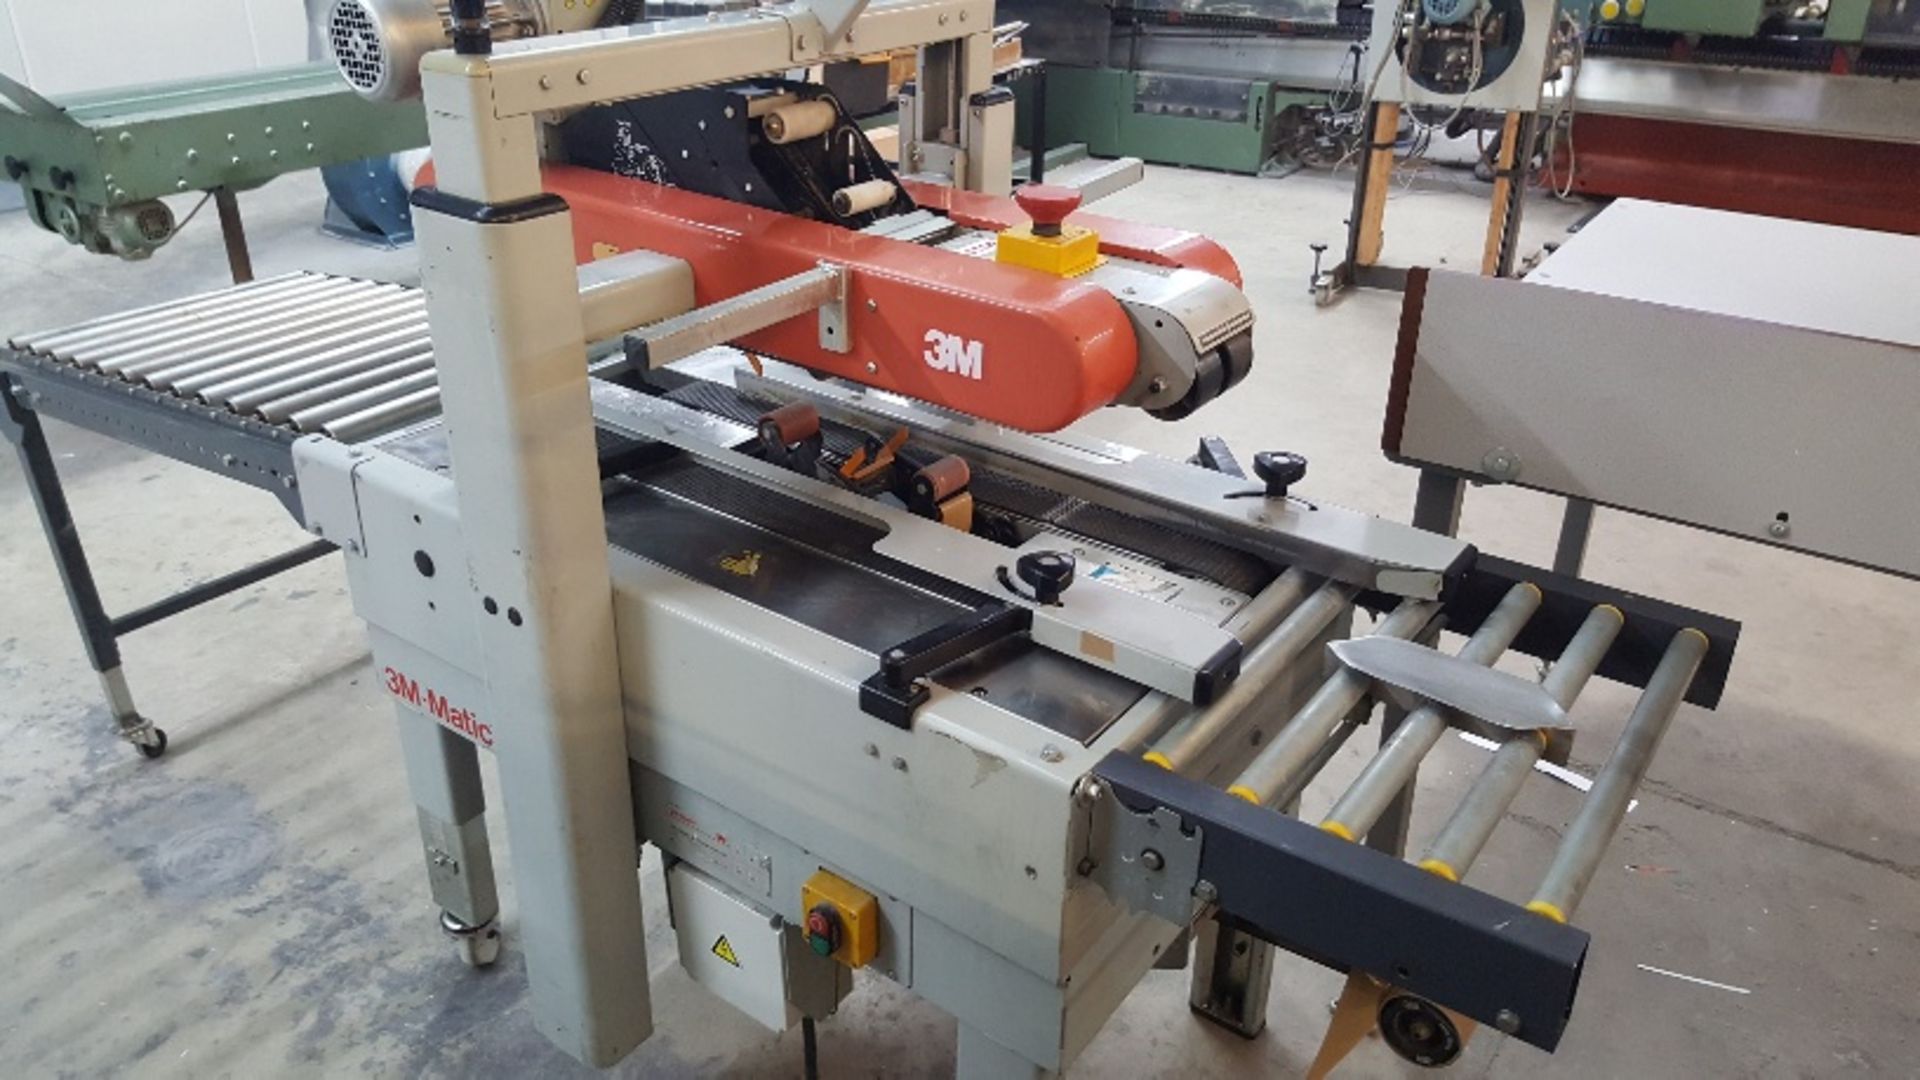 3M-Matic 700AE ADJUSTABLE CASE/BOX SEALER, serial no. 8300, year of manufacture 1997, top and bottom